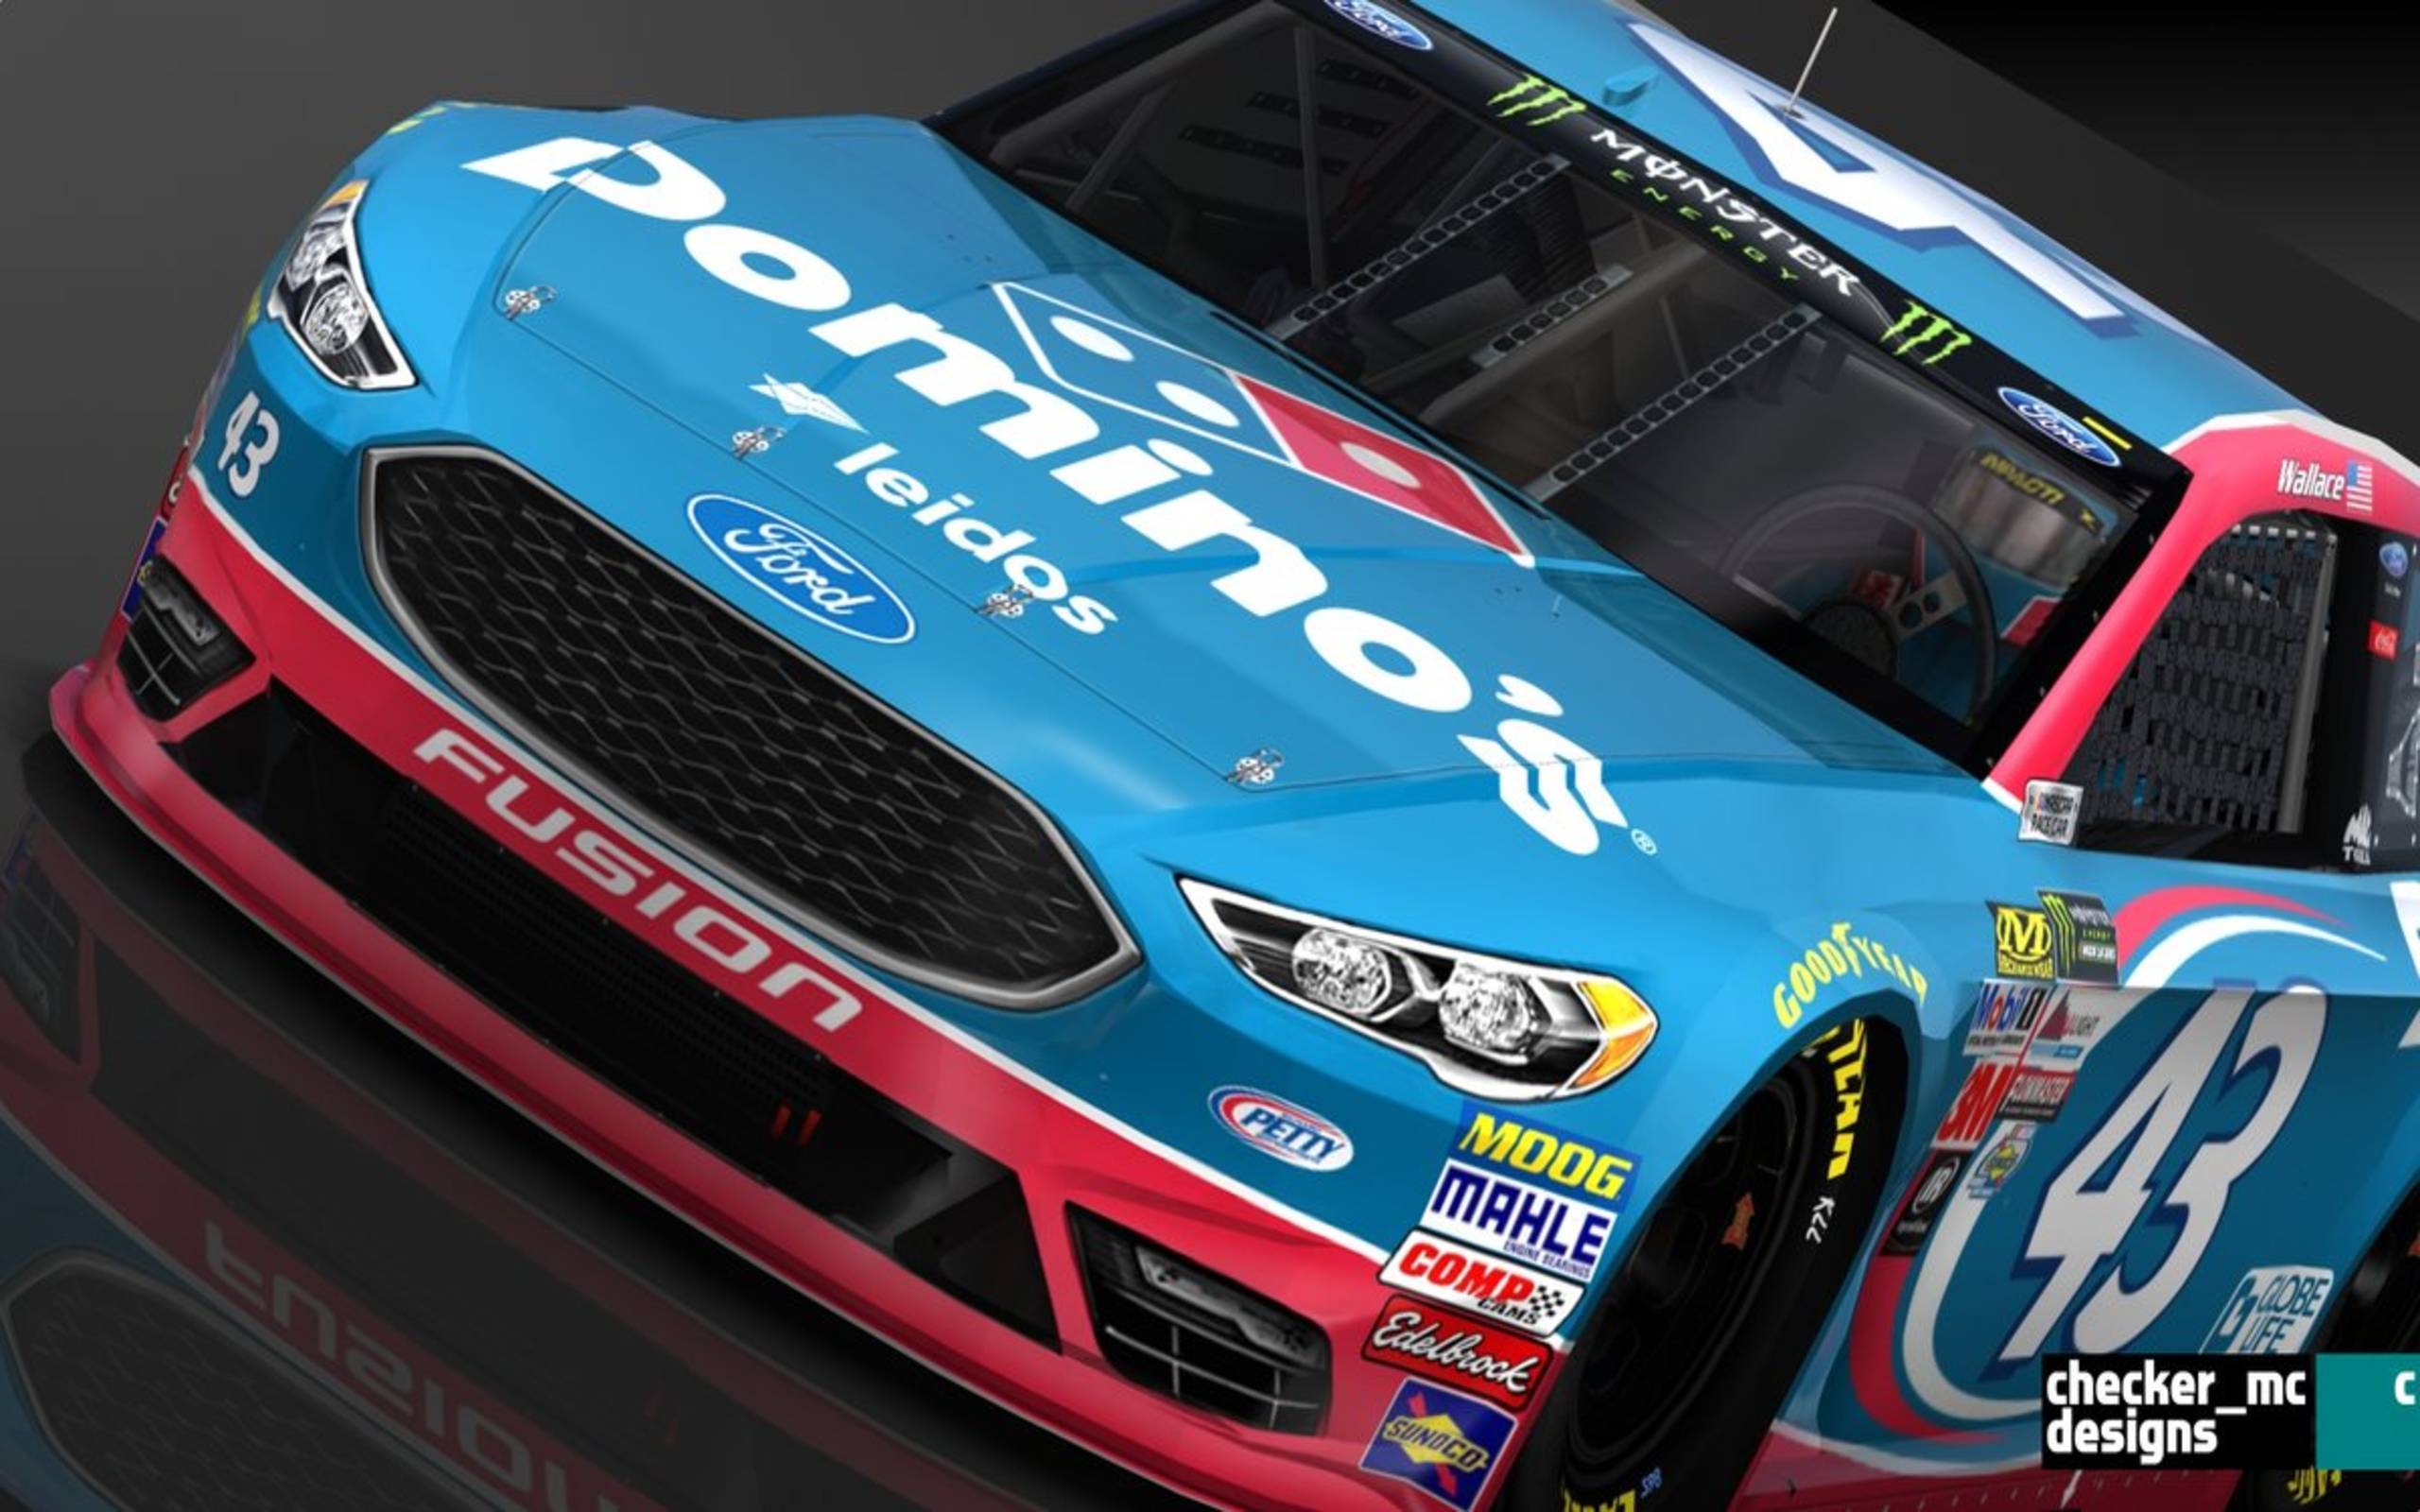 Video: Bubba Wallace goes after Domino's in comedic NASCAR sponsor